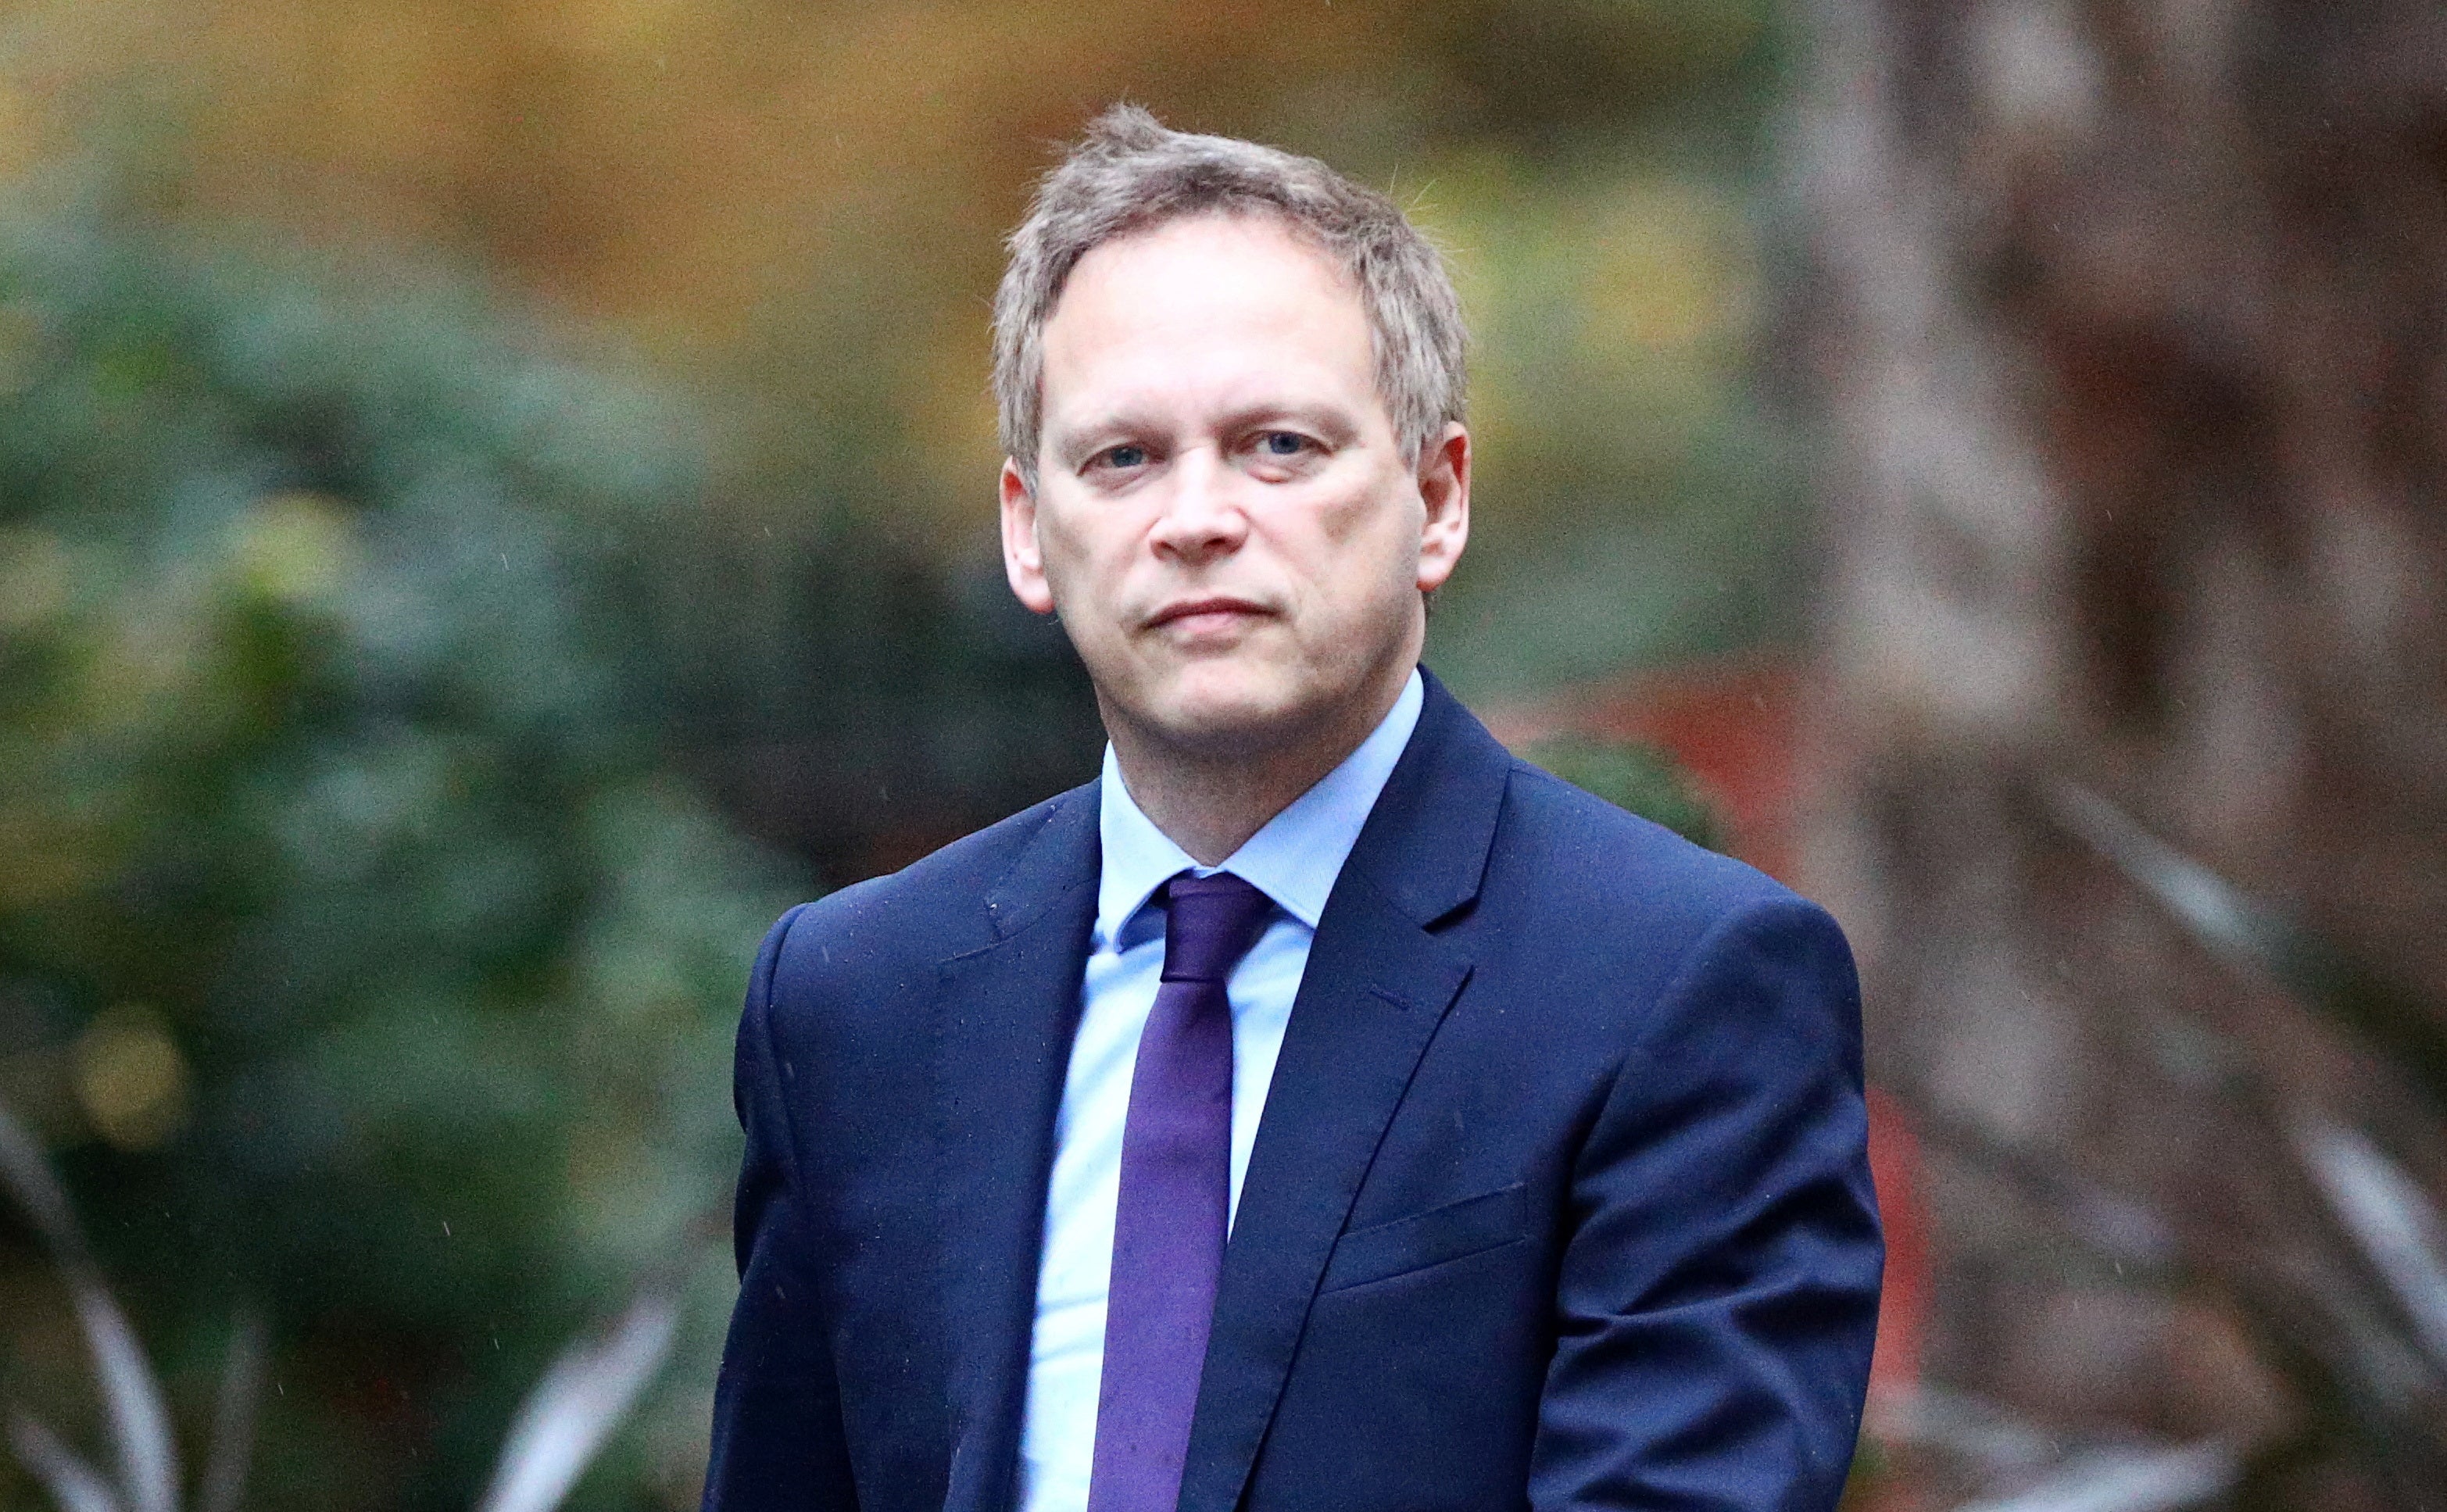 Three groups claimed the then-secretary of state, Grant Shapps, acted unlawfully by approving the plan